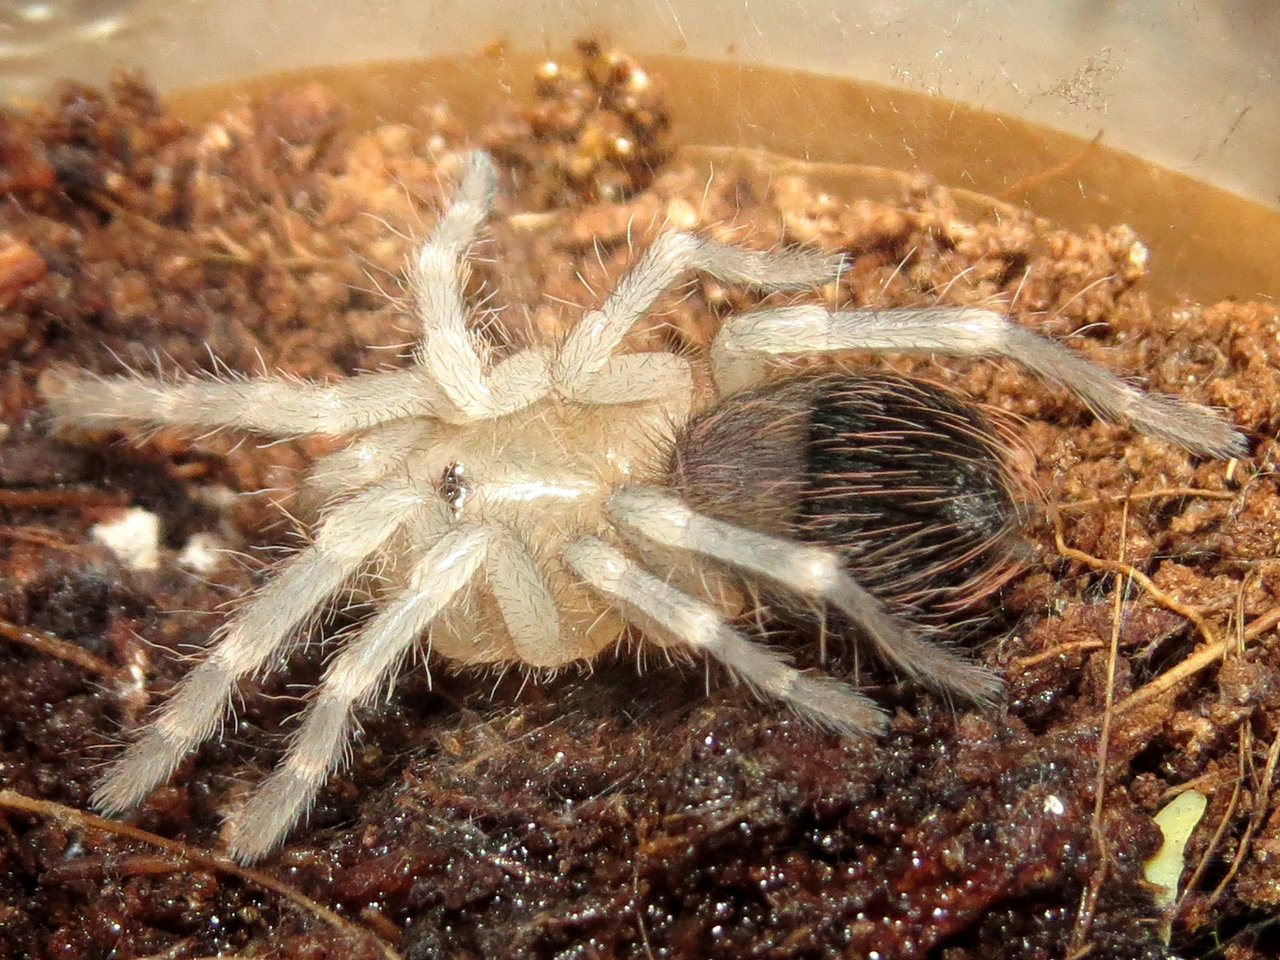 Freshly Molted Acanthoscurria geniculata Sling (♂ 0.75")